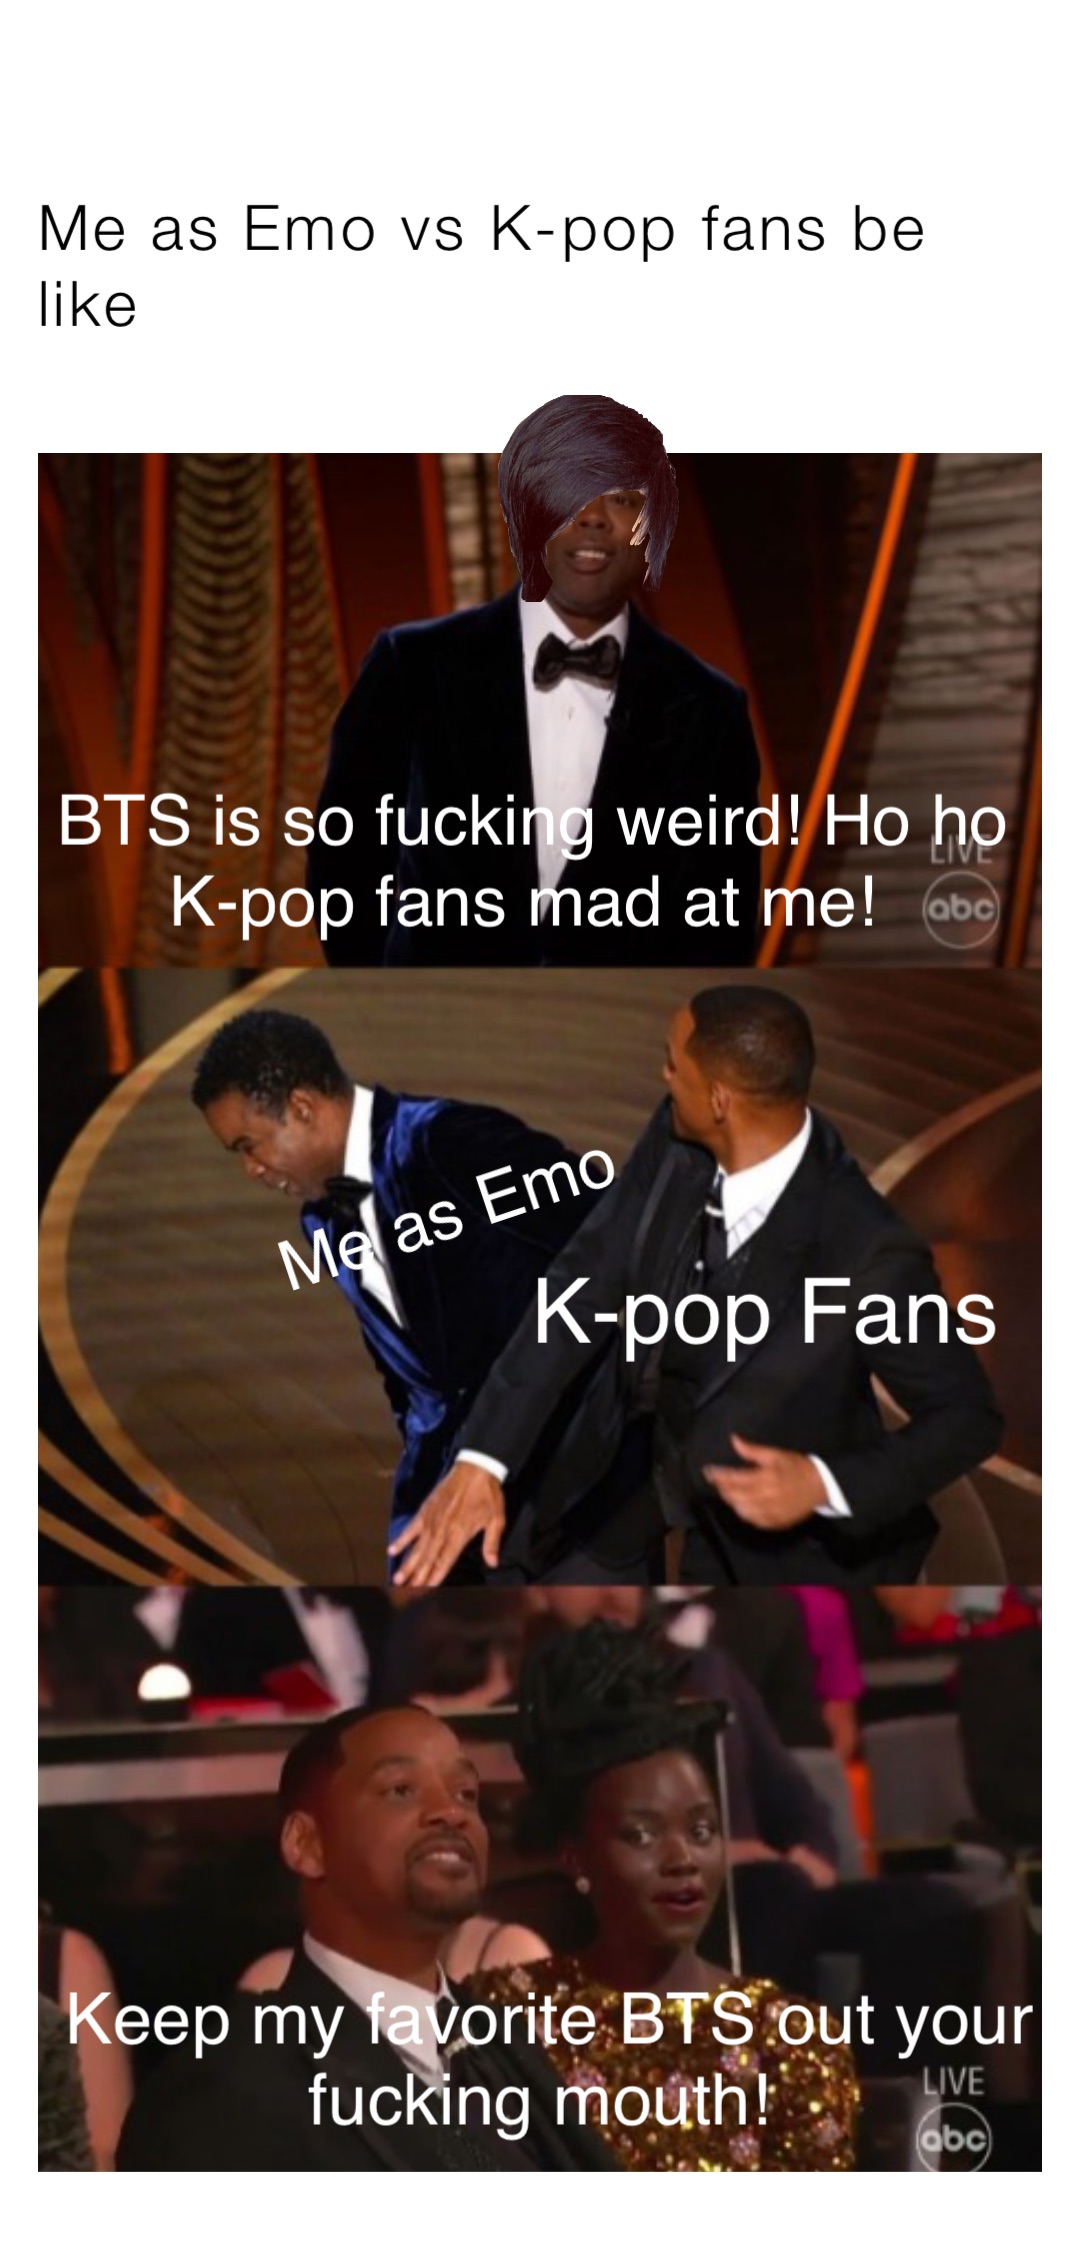 Me as Emo vs K-pop fans be like BTS is so fucking weird! Ho ho K-pop fans mad at me! Me as Emo K-pop Fans Keep my favorite BTS out your fucking mouth!